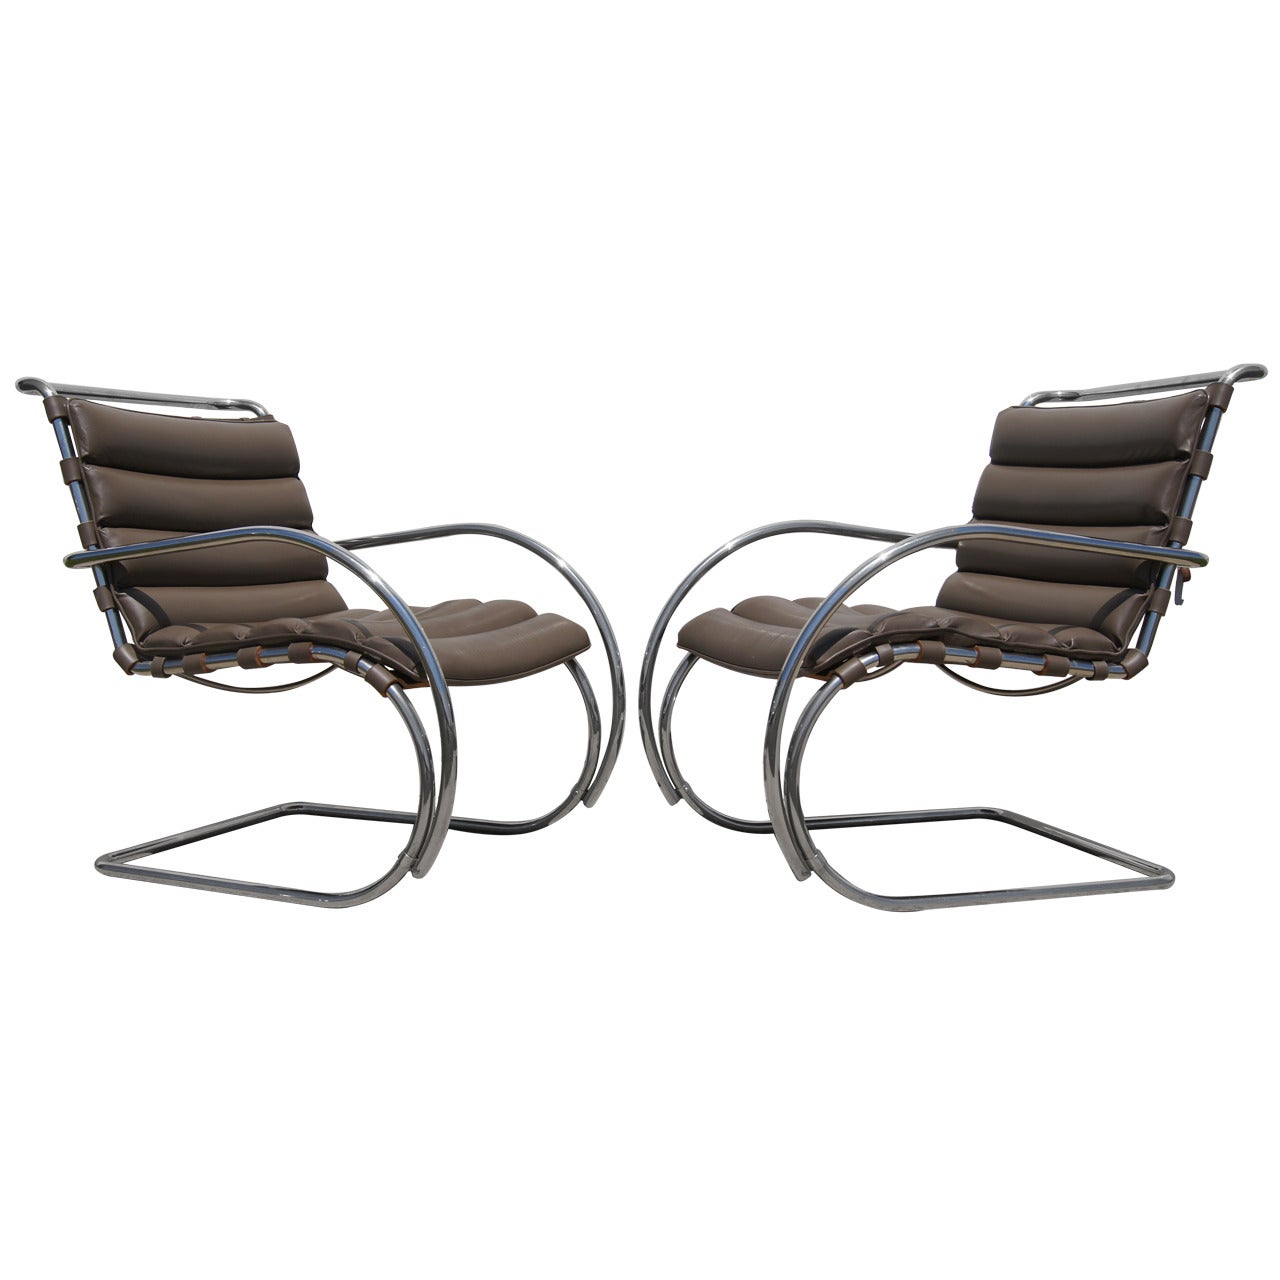 Pair of Brown Leather MR Lounge Armchairs by Mies van der Rohe for Knoll